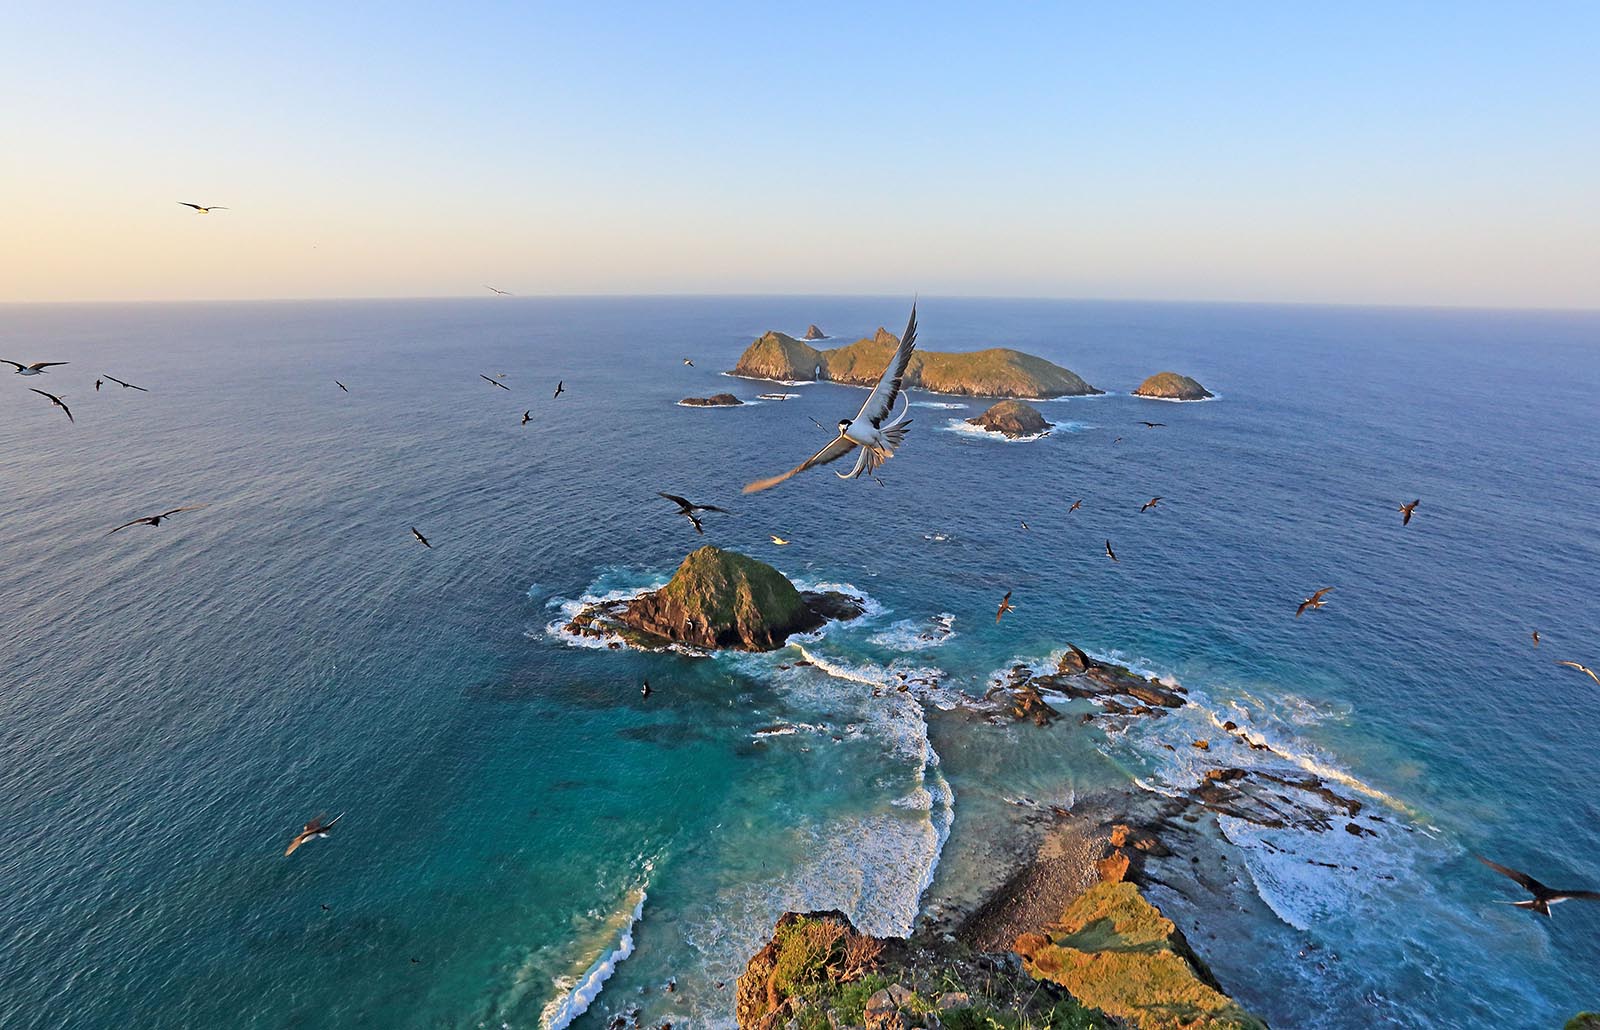 Birds flying high above Lord Howe Island, looking out towards Admiralty Islands | Lord Howe Island, a natural paradise